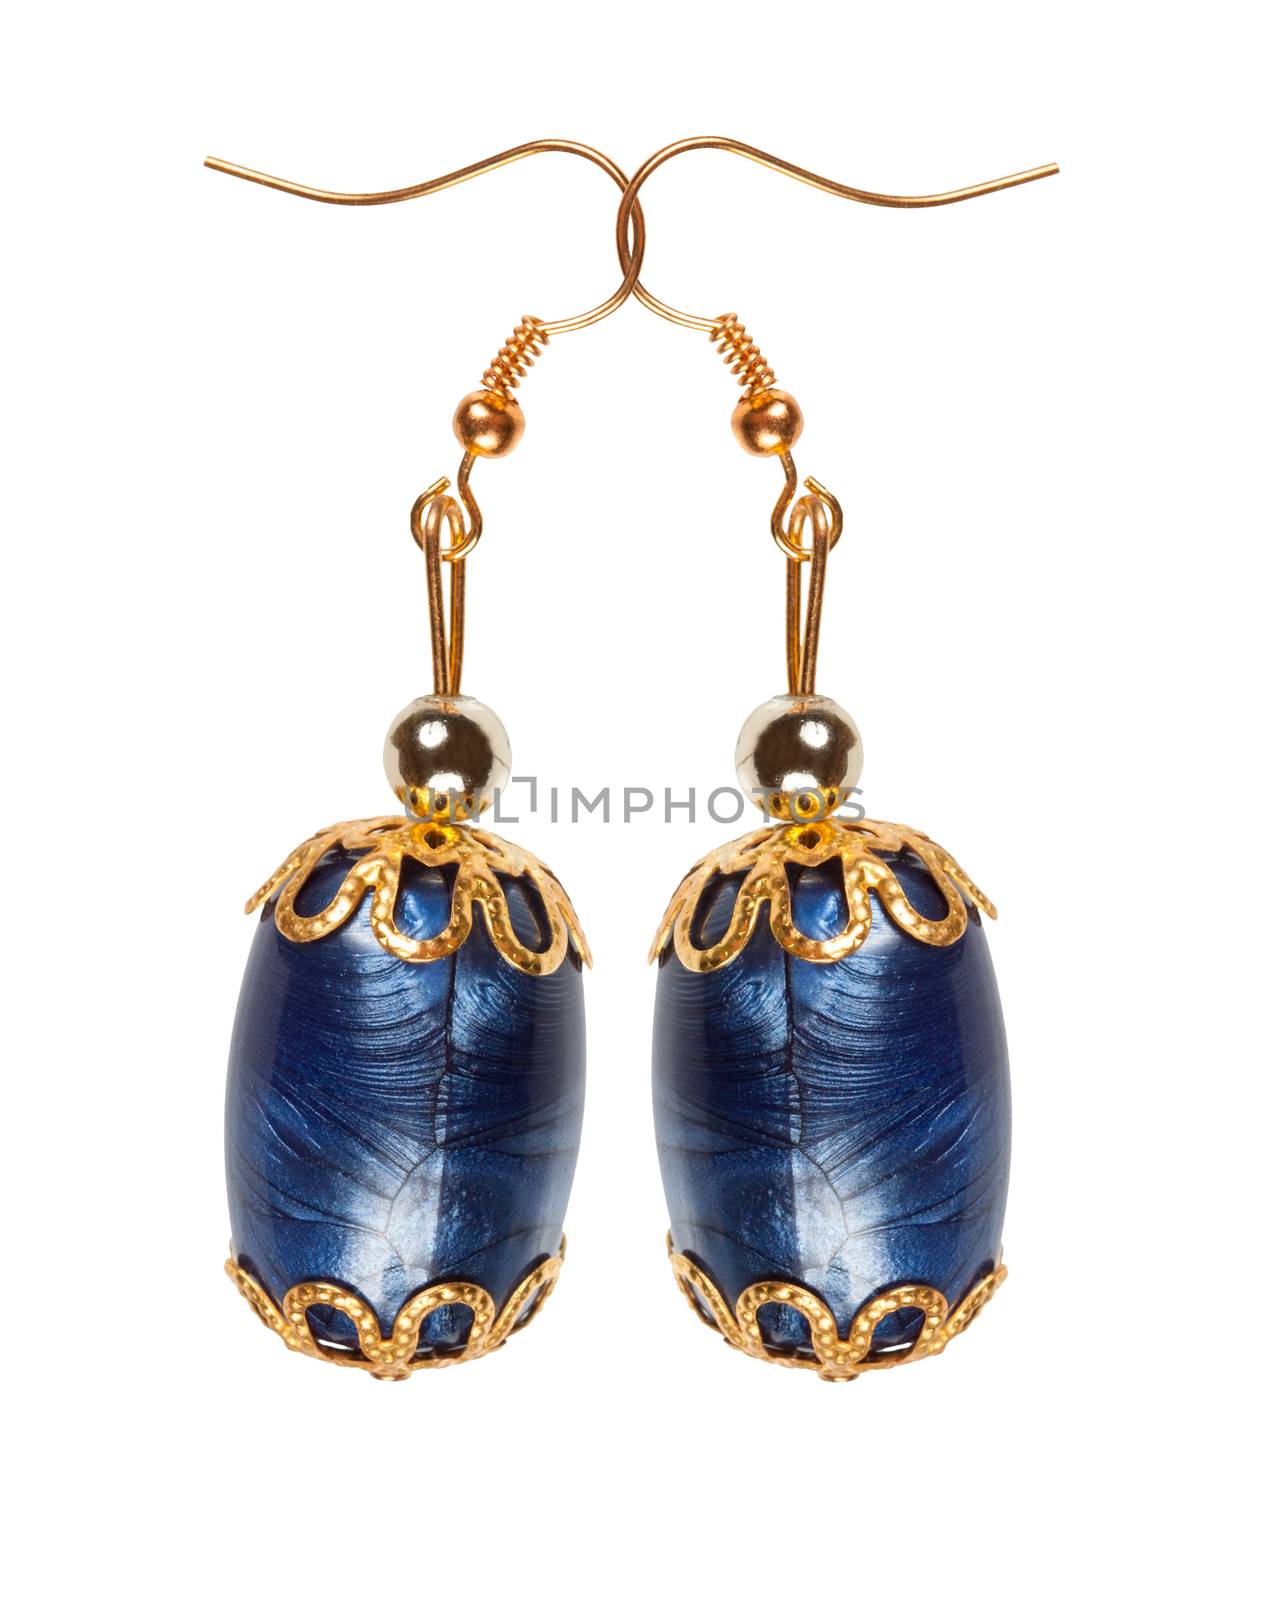 Blue plastic pearl earrings with gold elements on a white background. Collage